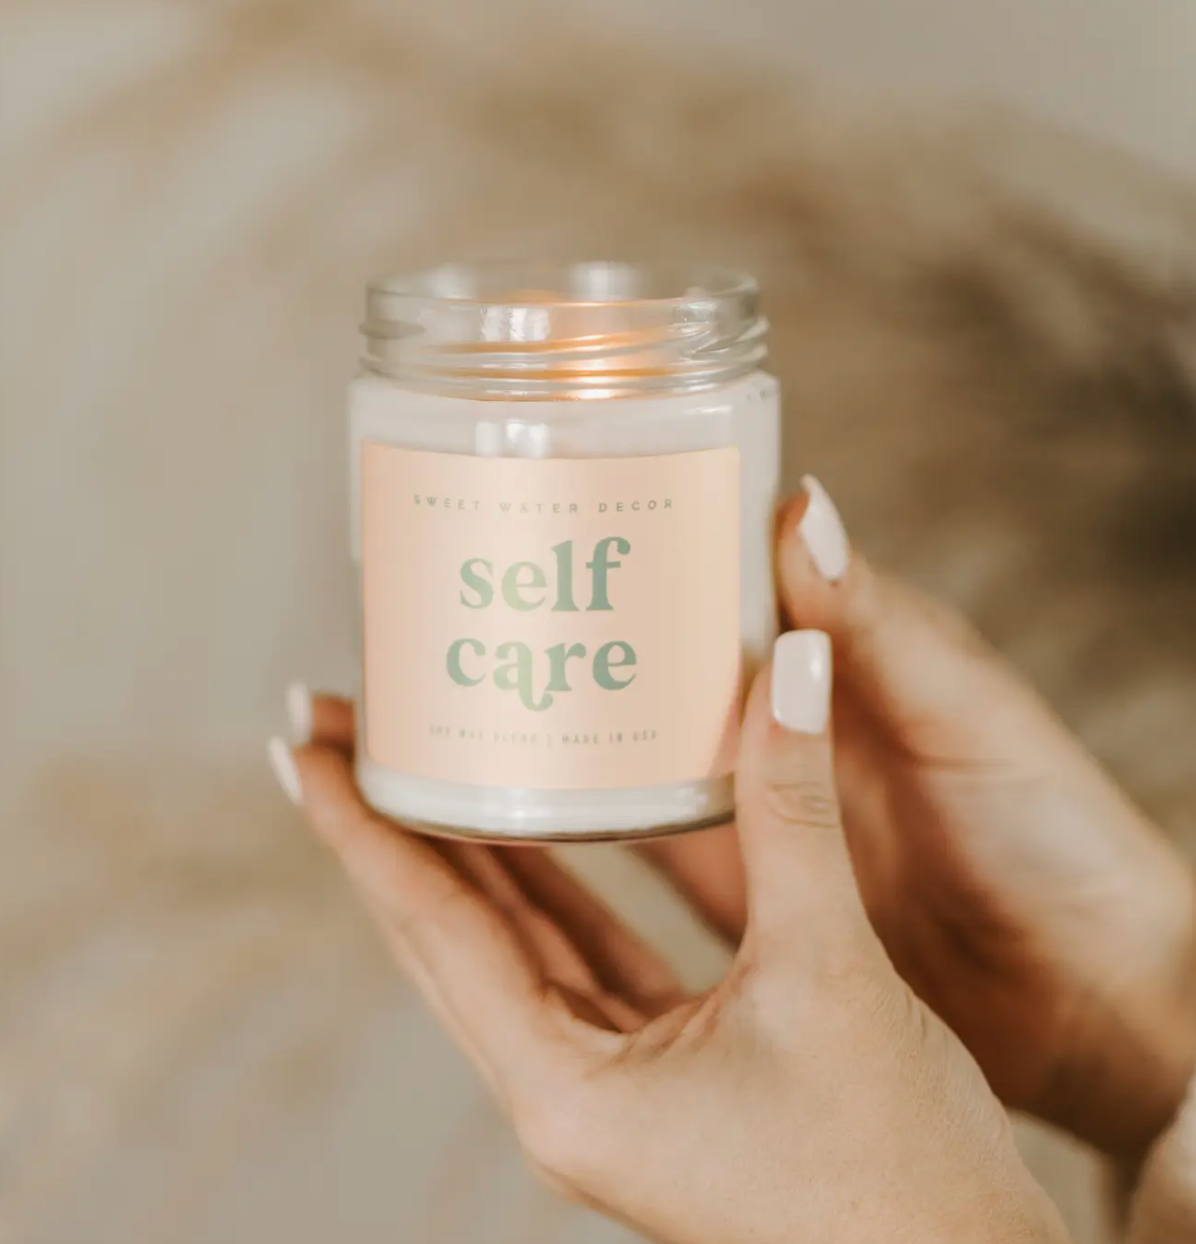 Self Care 9 Oz. Soy Candle